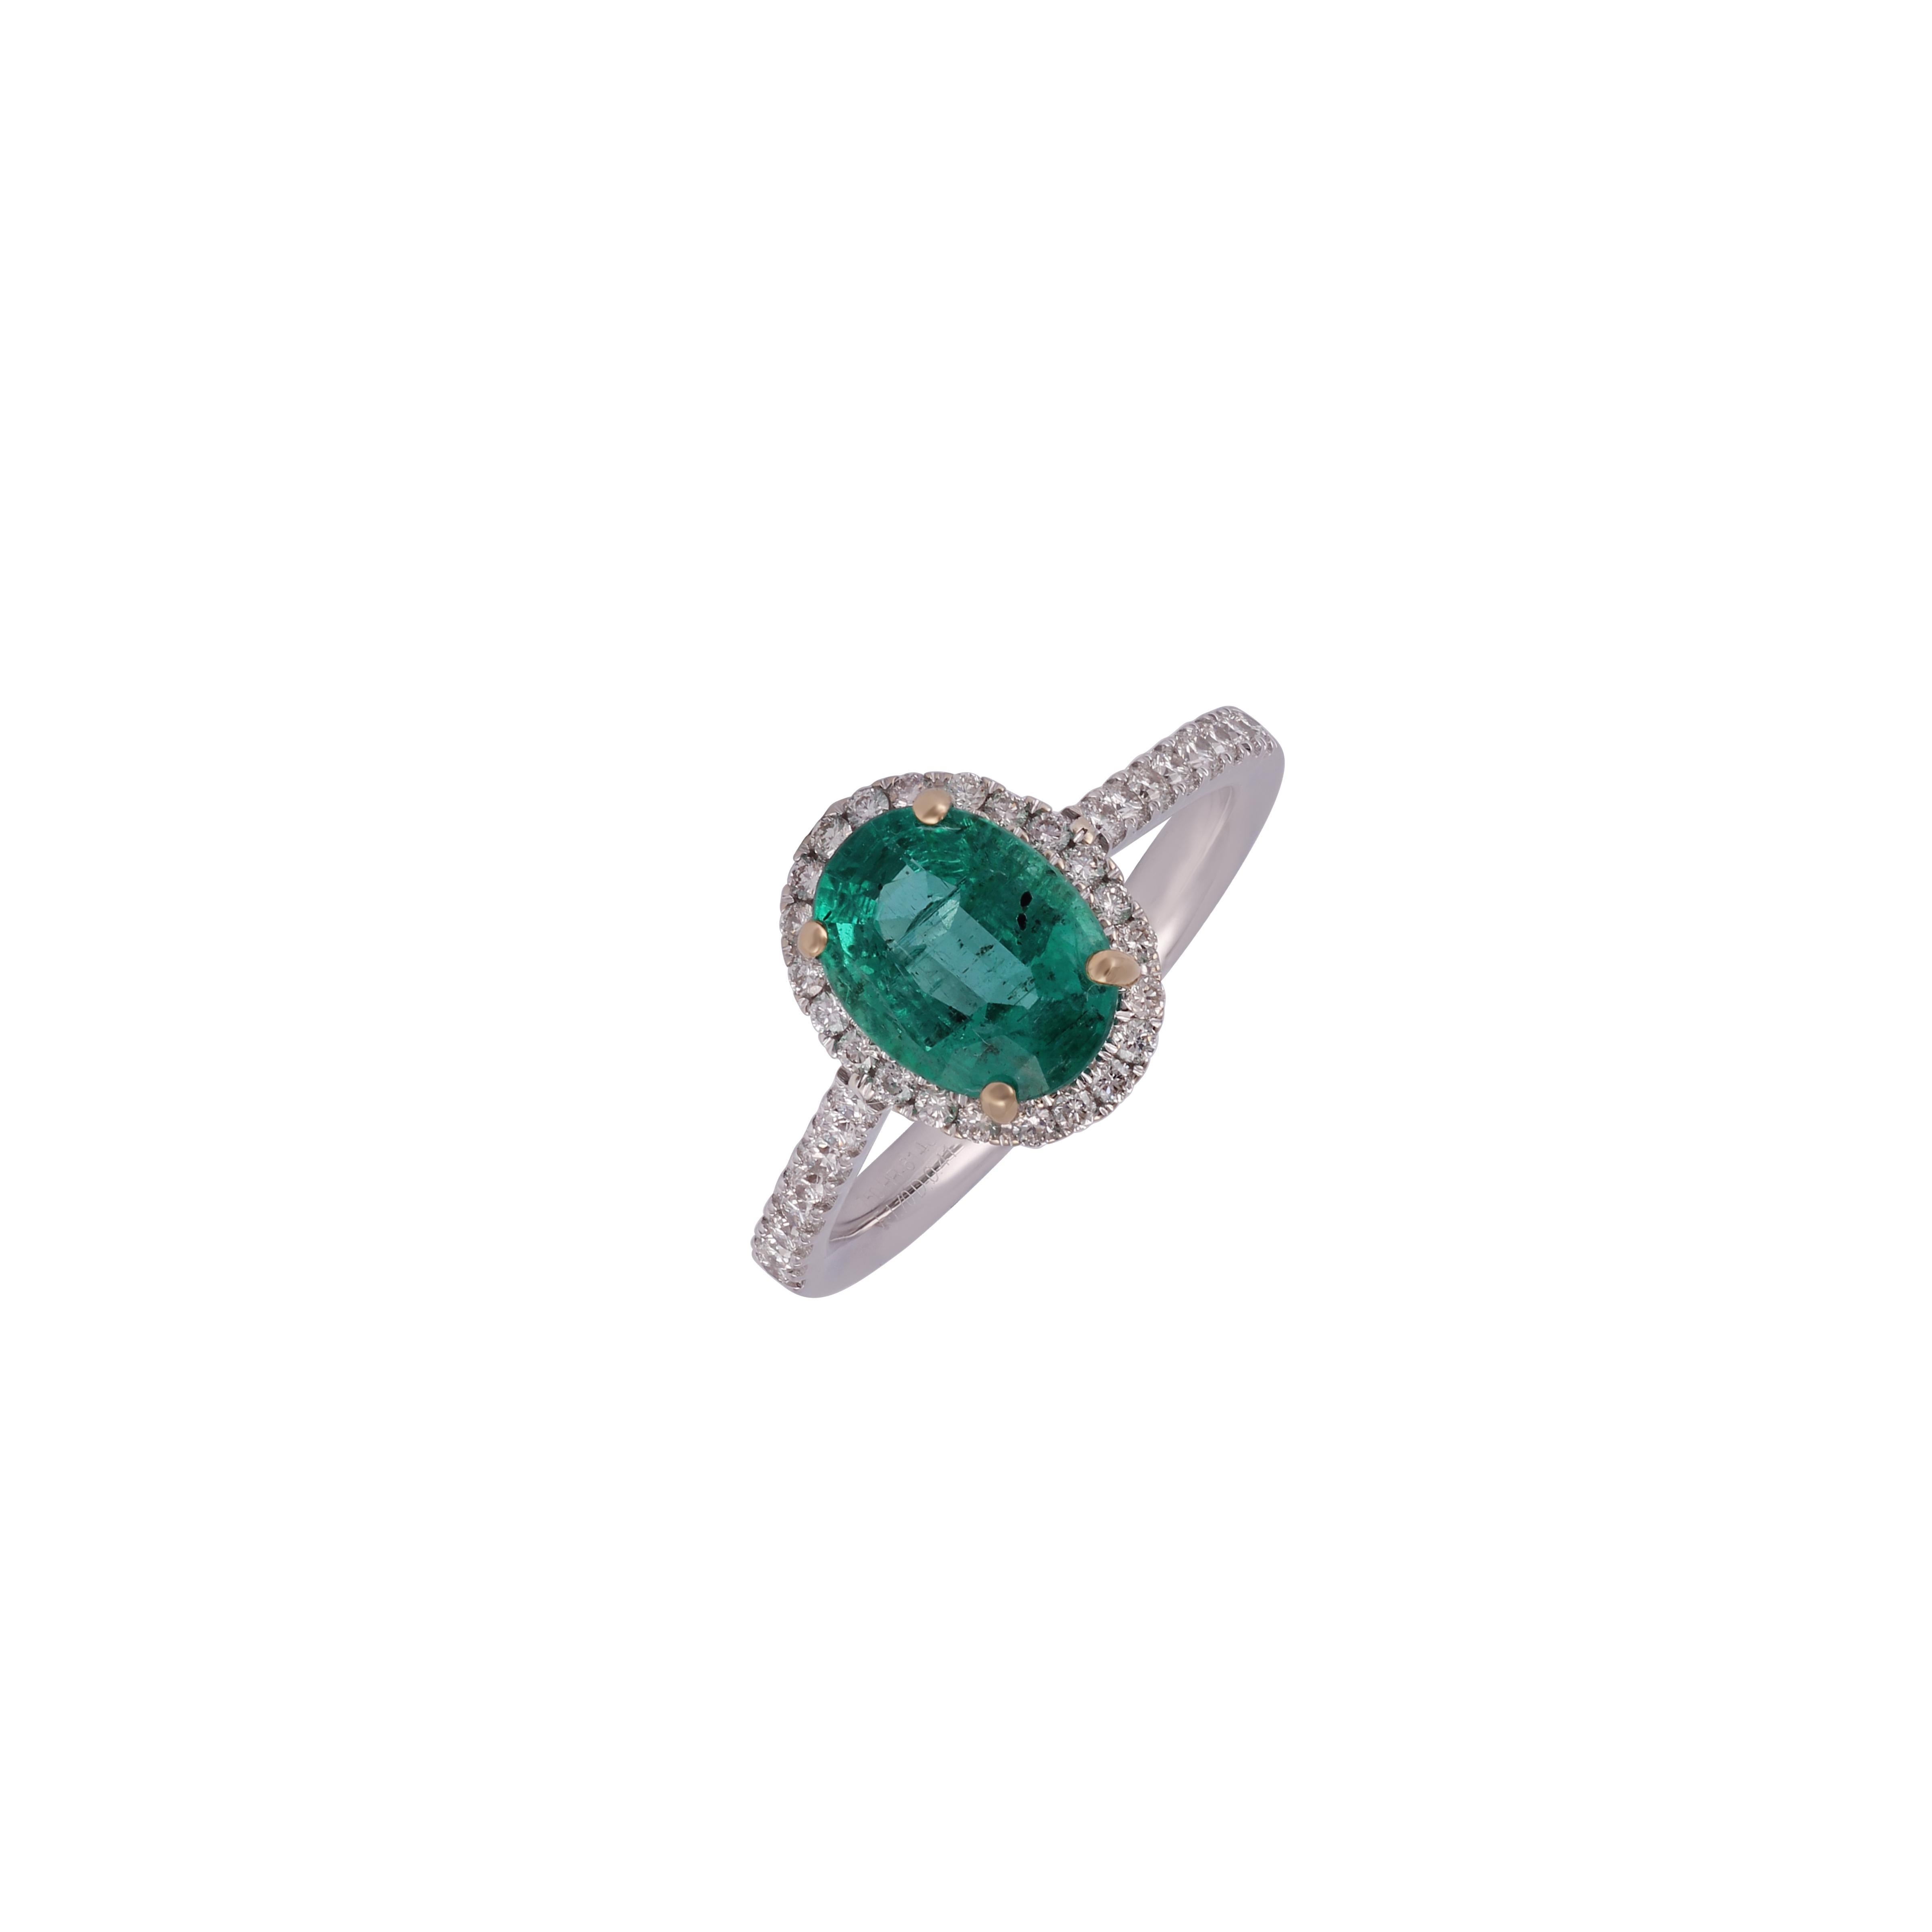 Oval Cut 1.70 Carat Zambian Emerald & Diamond Ring Studded in 18k White Gold For Sale